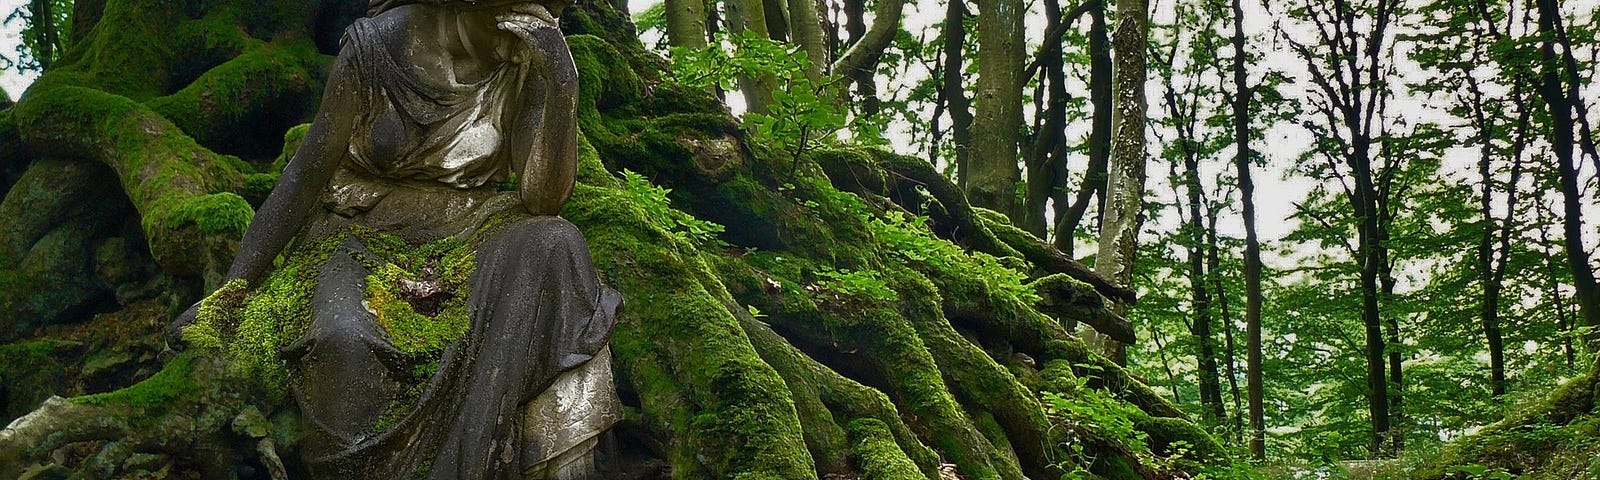 Roots covered in green moss with a weathered grey statue of a woman with her hand to her head among them.